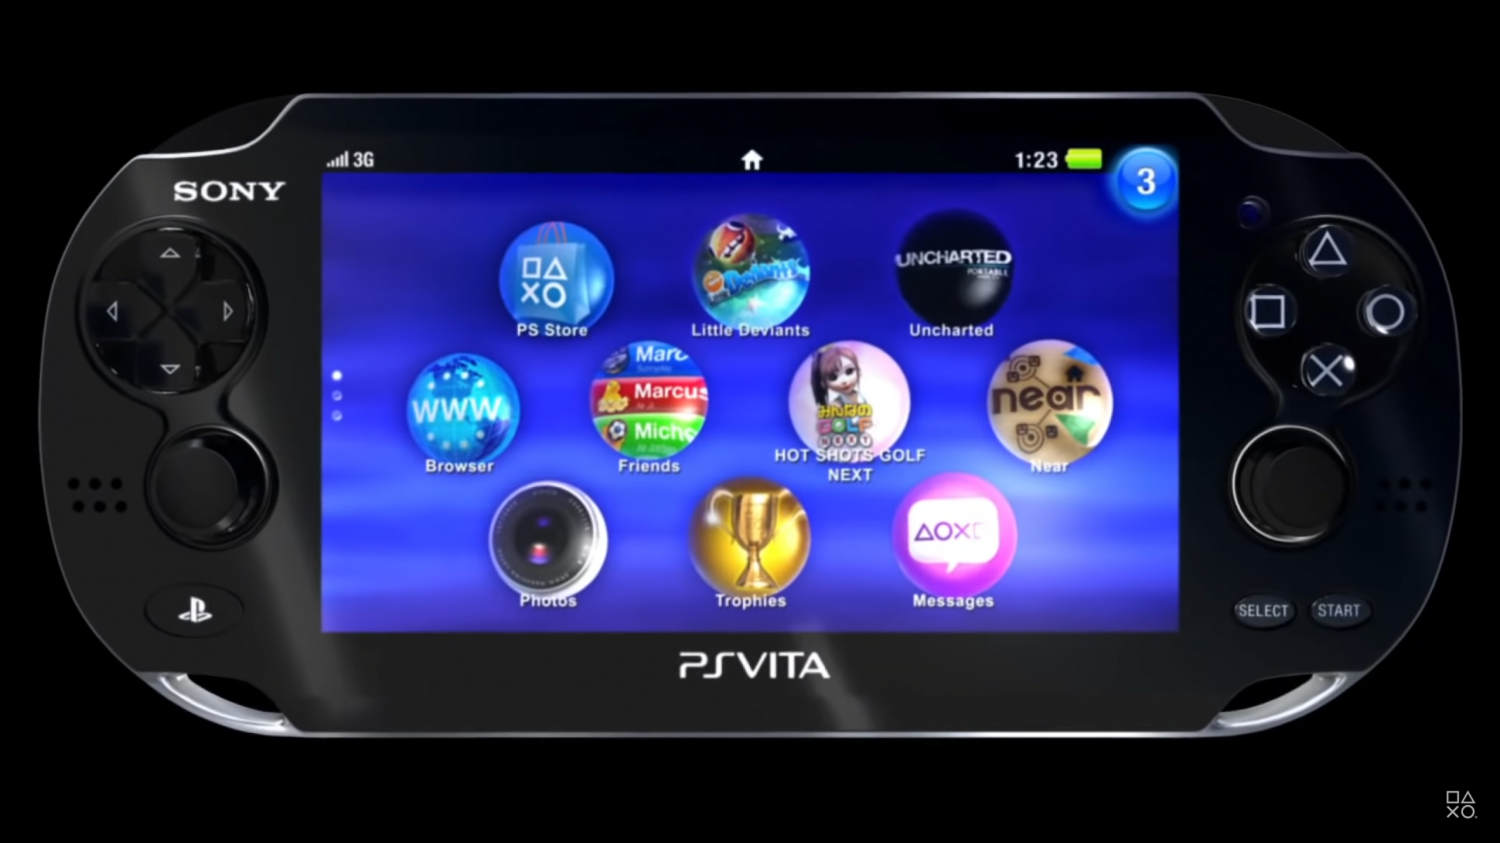 Sony Confirms PS3/Vita Store Support Will Be Ending!